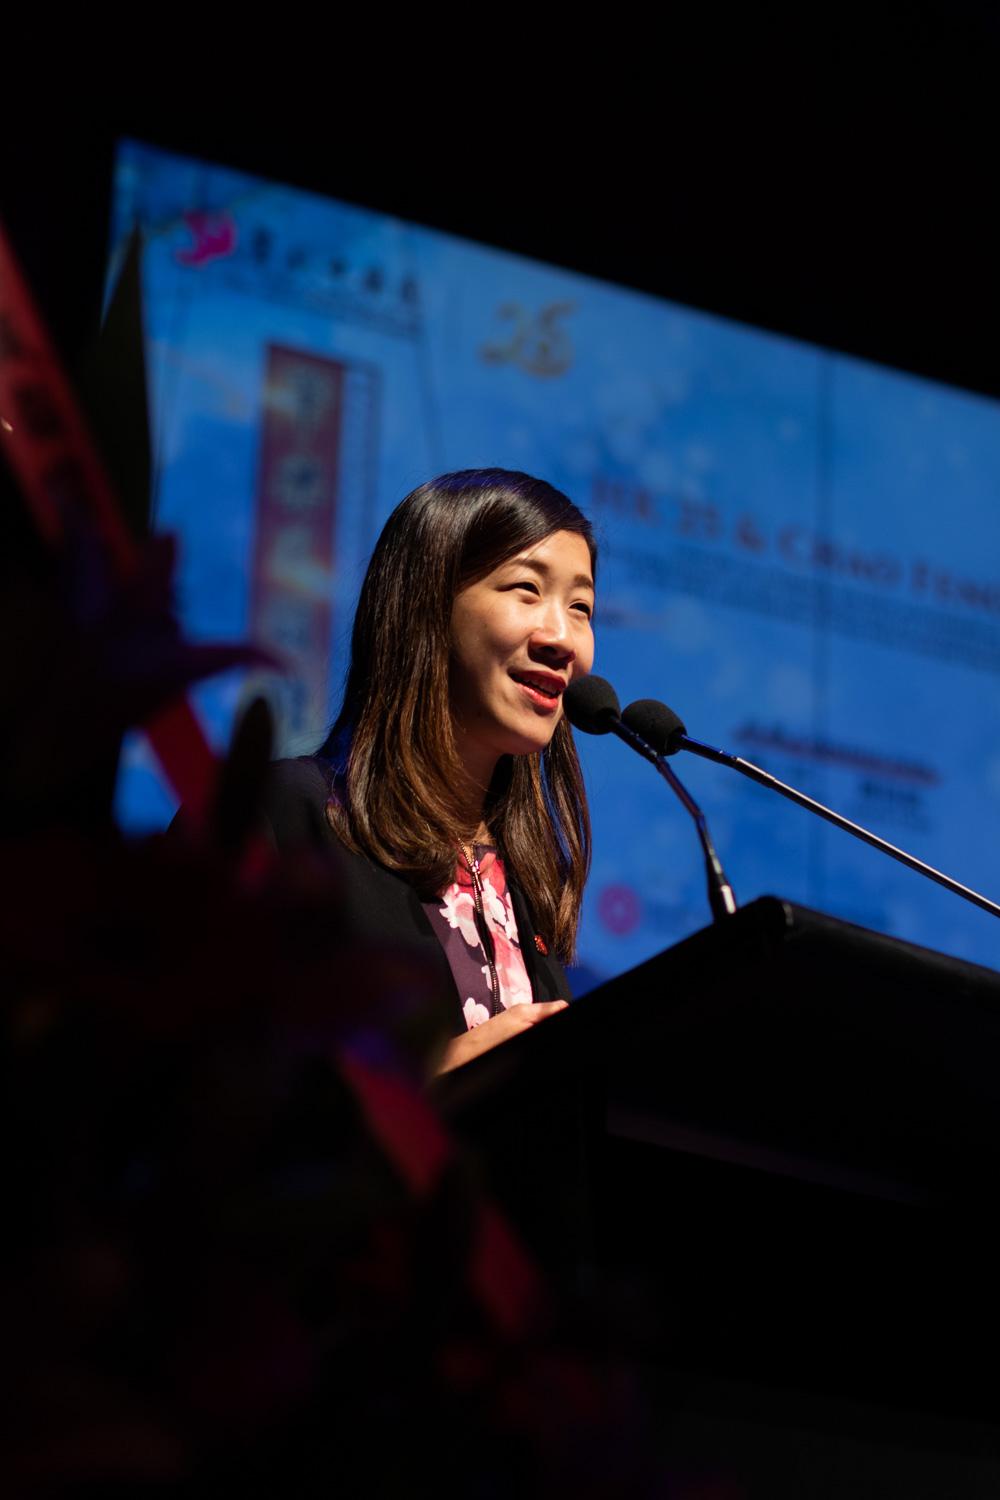 The Hong Kong Economic and Trade Office, Sydney (Sydney ETO), presented the "HK 25 & Chao Feng 40" Chinese music concert in Melbourne, Australia, yesterday (September 4) to celebrate the 25th anniversary of the establishment of the Hong Kong Special Administrative Region and promote traditional Chinese music. Photo shows the Director of the Sydney ETO, Miss Trista Lim, speaking at the opening of the concert.